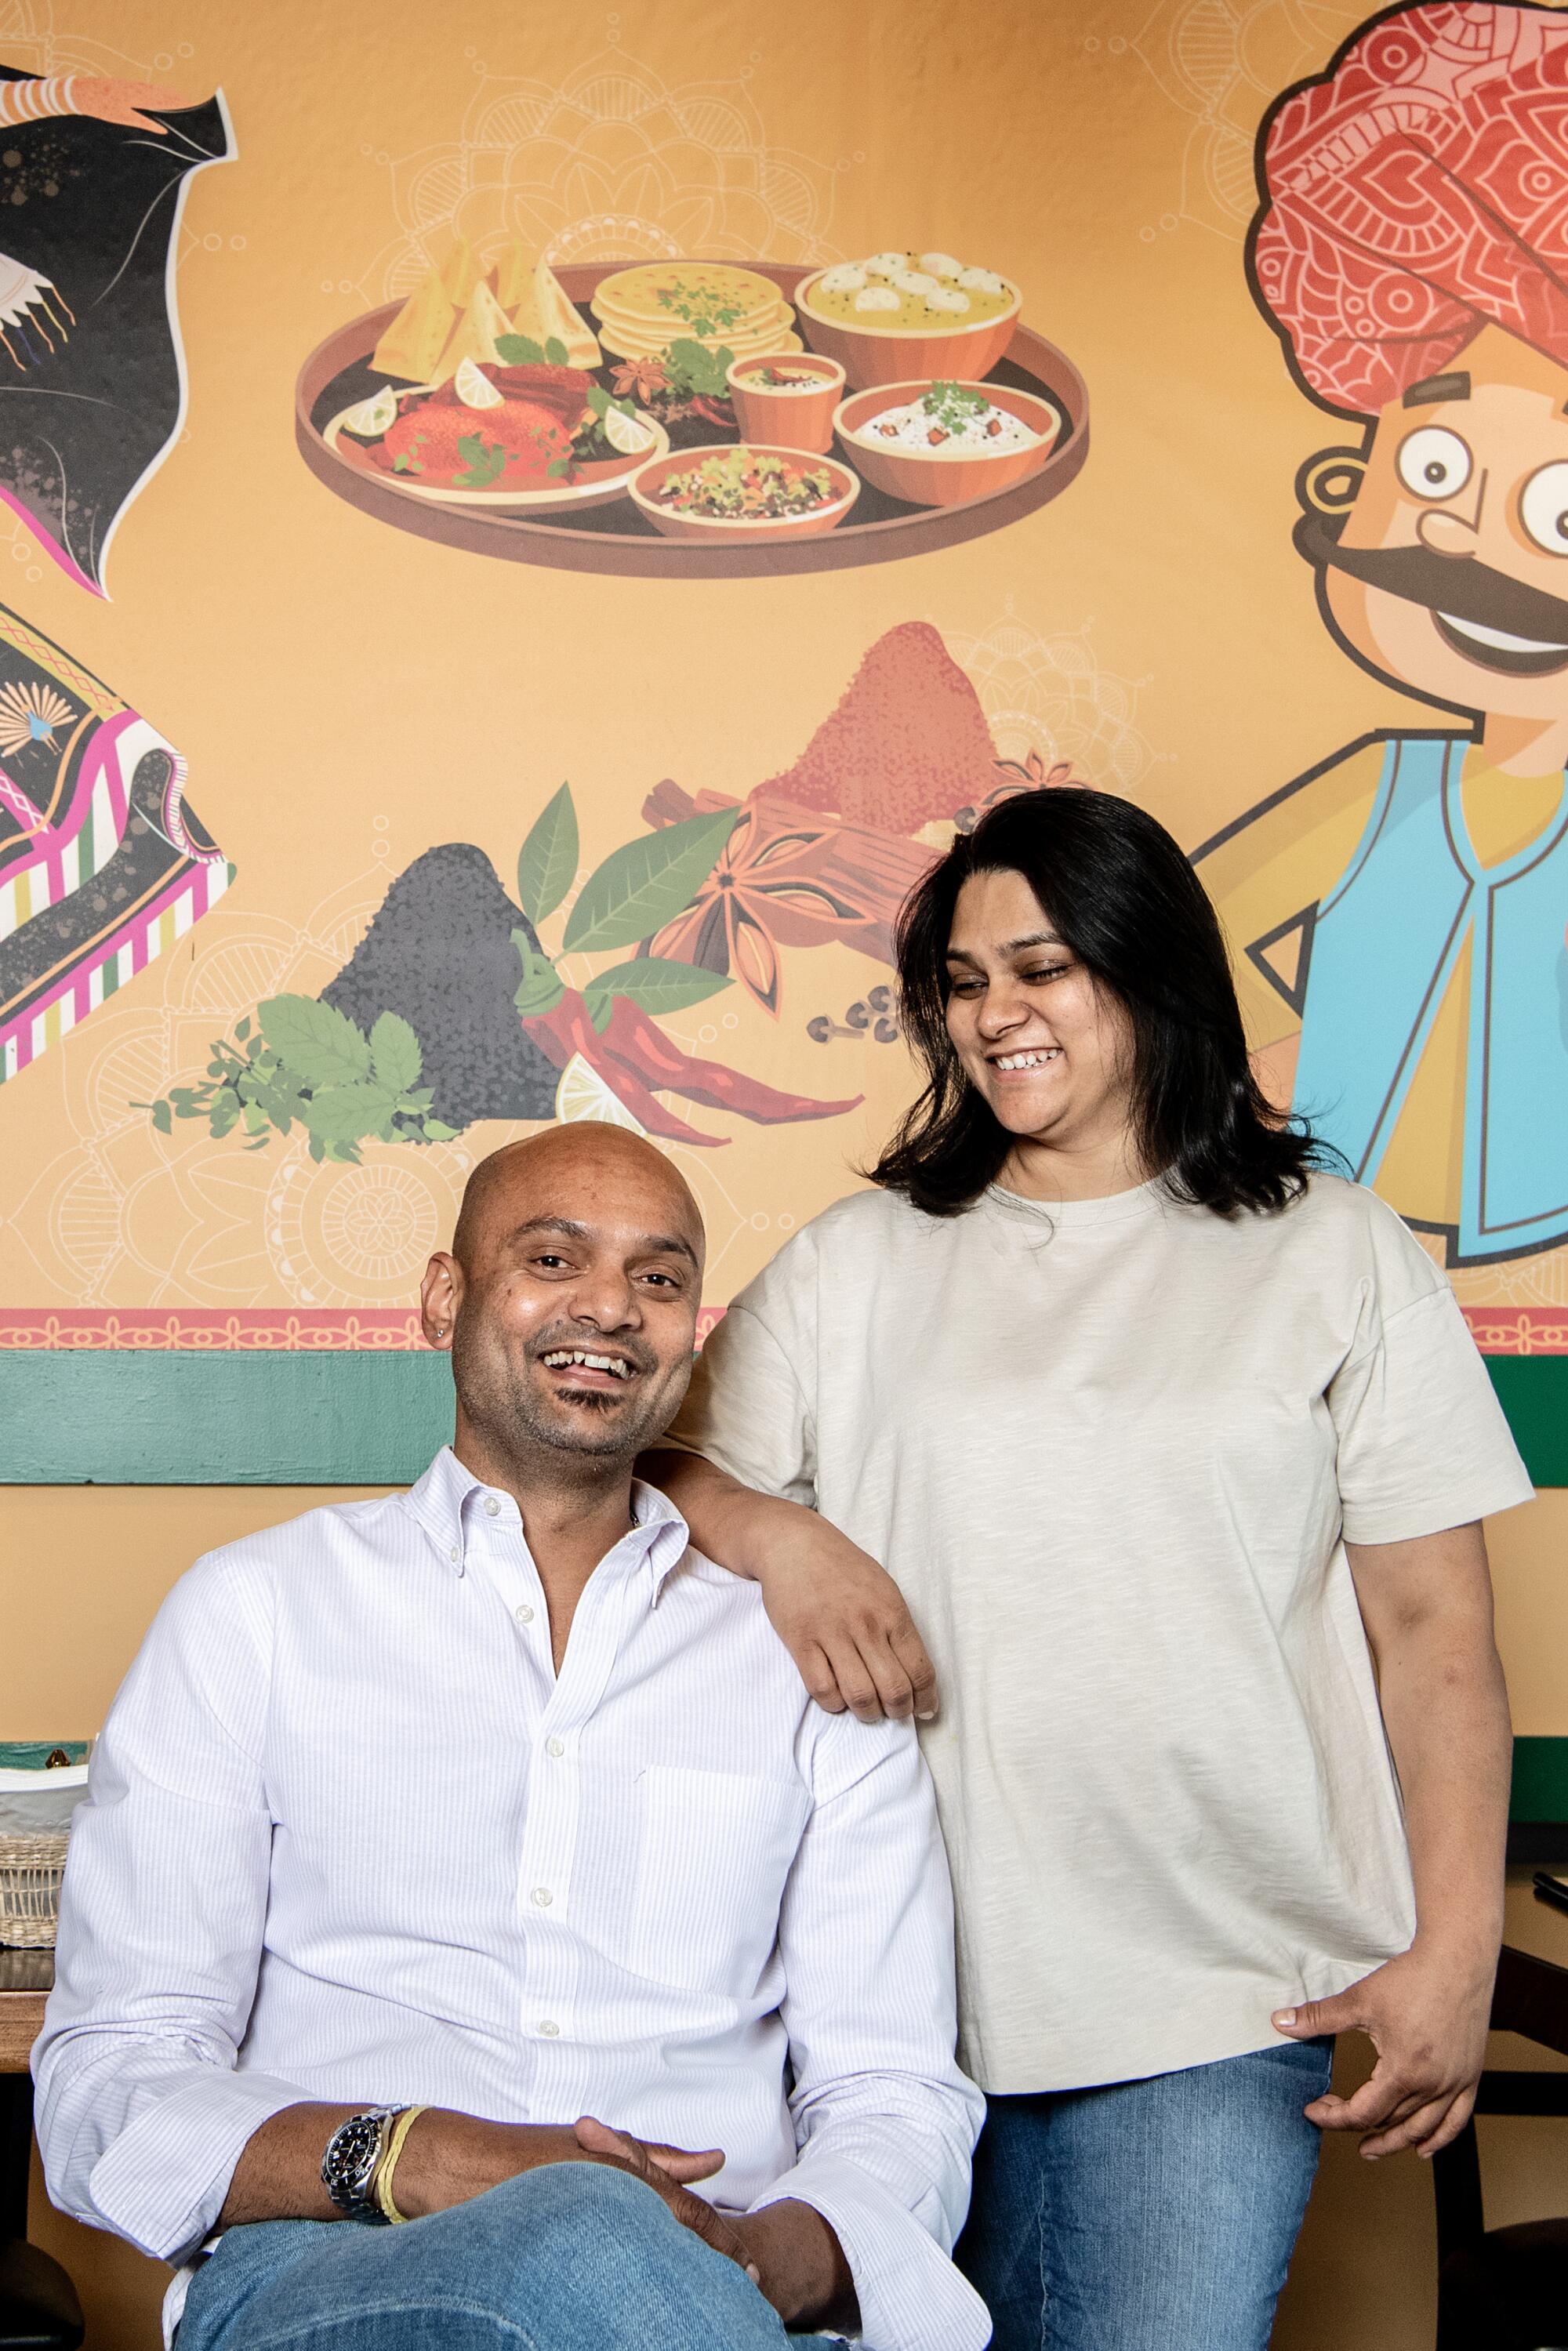 The owners of Bhookhe restaurant, Anshul and Pooja Dwivedi, pose in front of a mural.